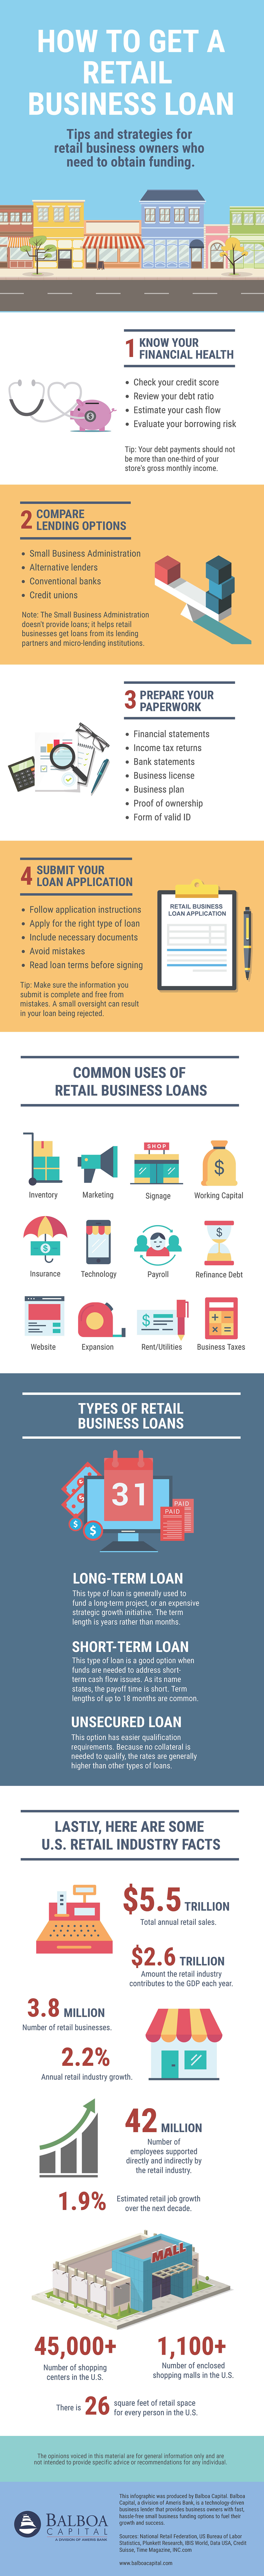 Retail Business Loans Infographic